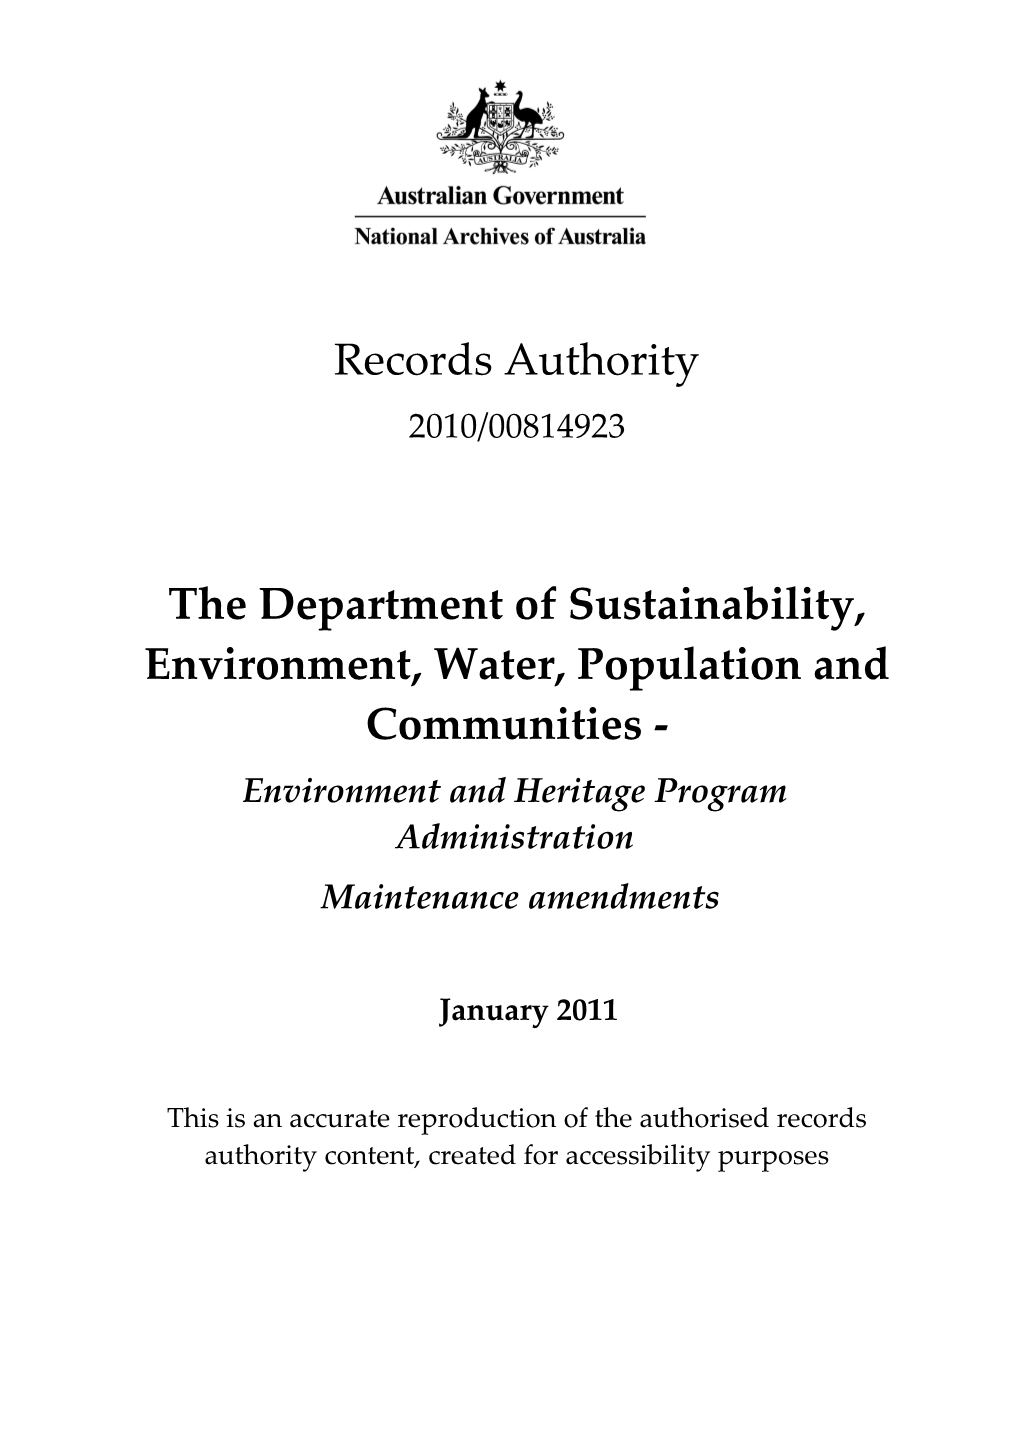 The Department of Sustainability, Environment, Water, Population and Communities 2010/00814923